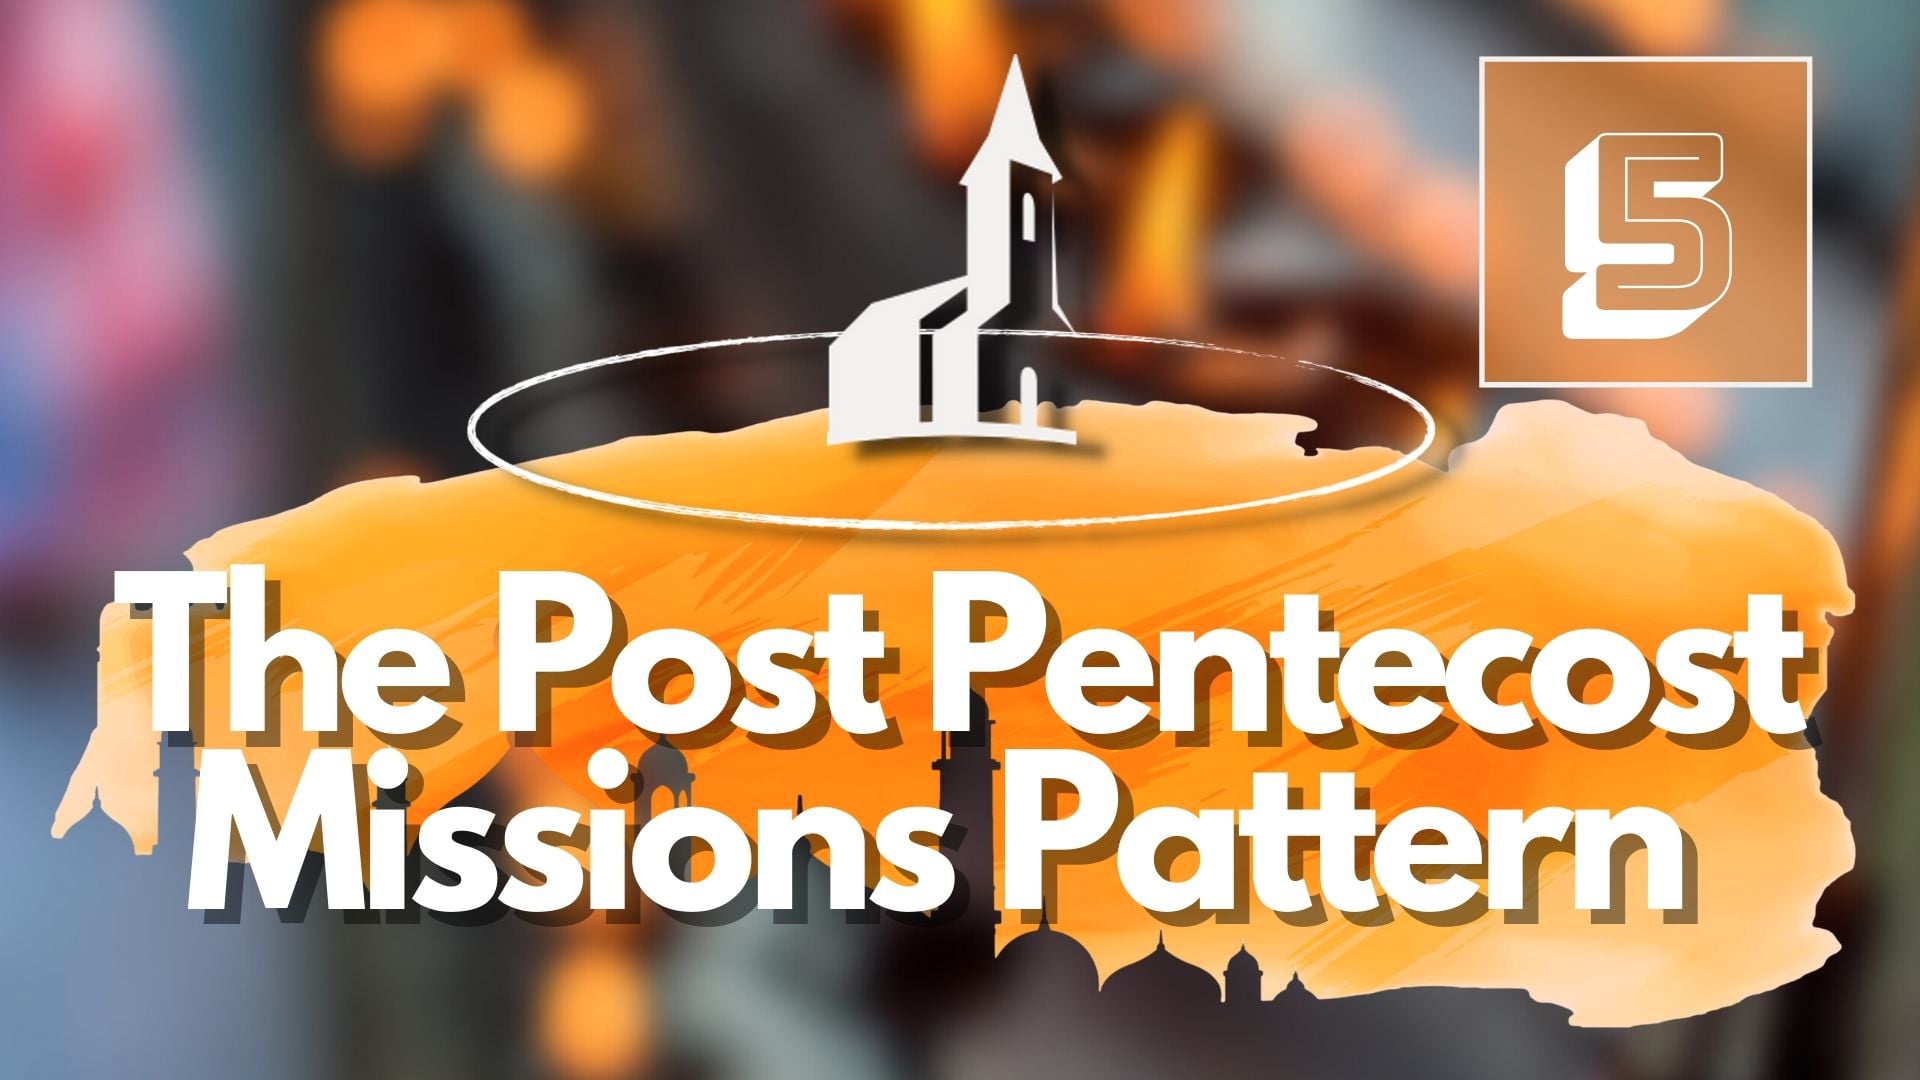 5. The Post Pentecost Missions Pattern – Mike Shipman